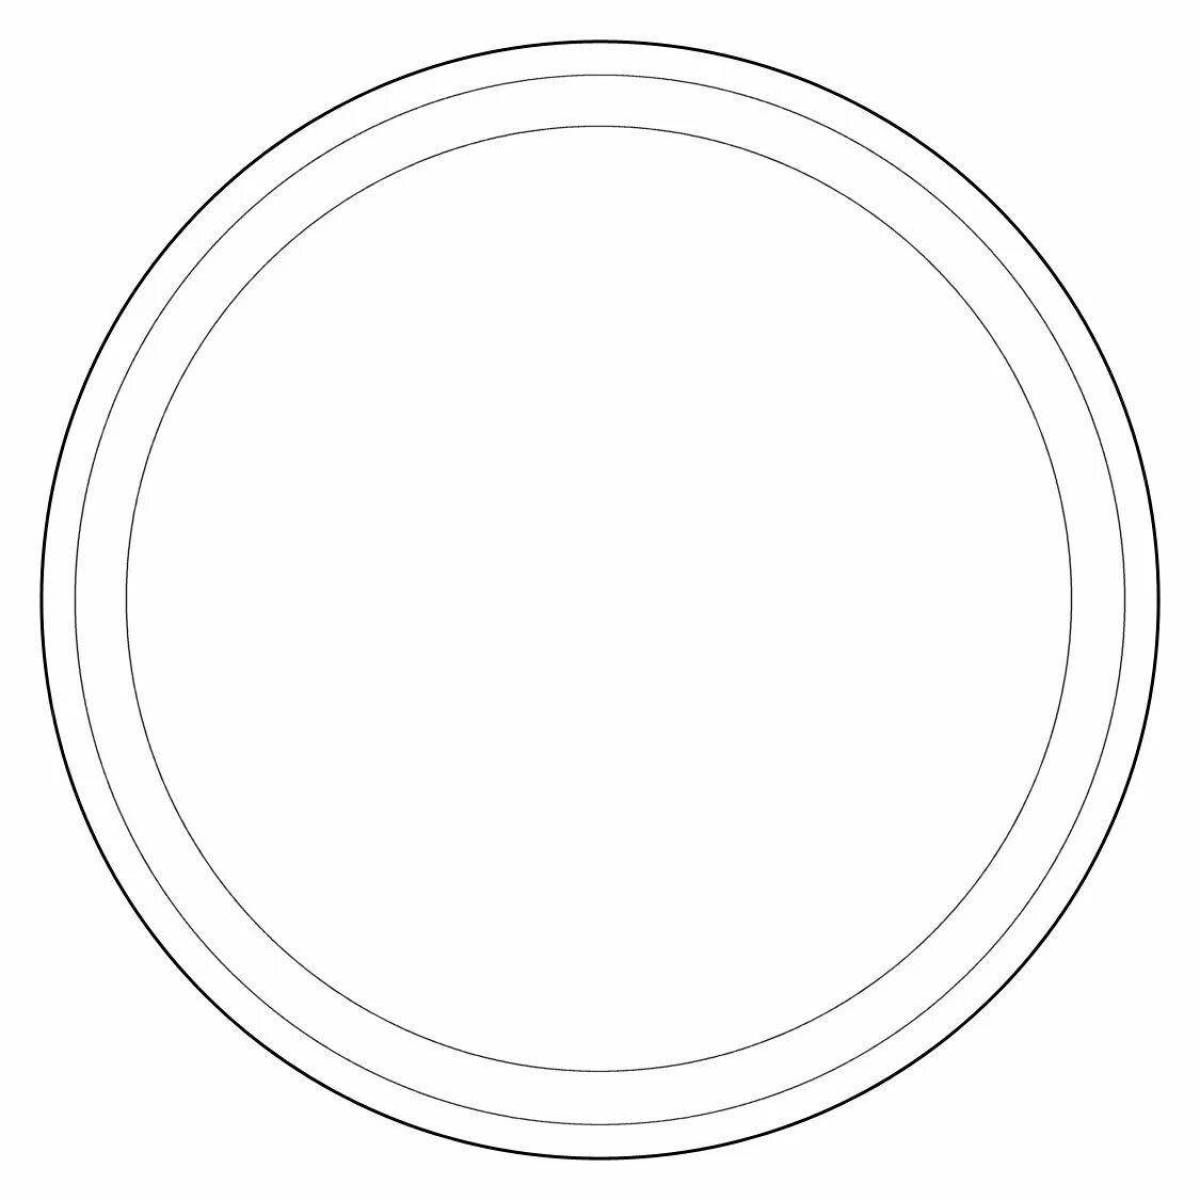 Adorable circle coloring page